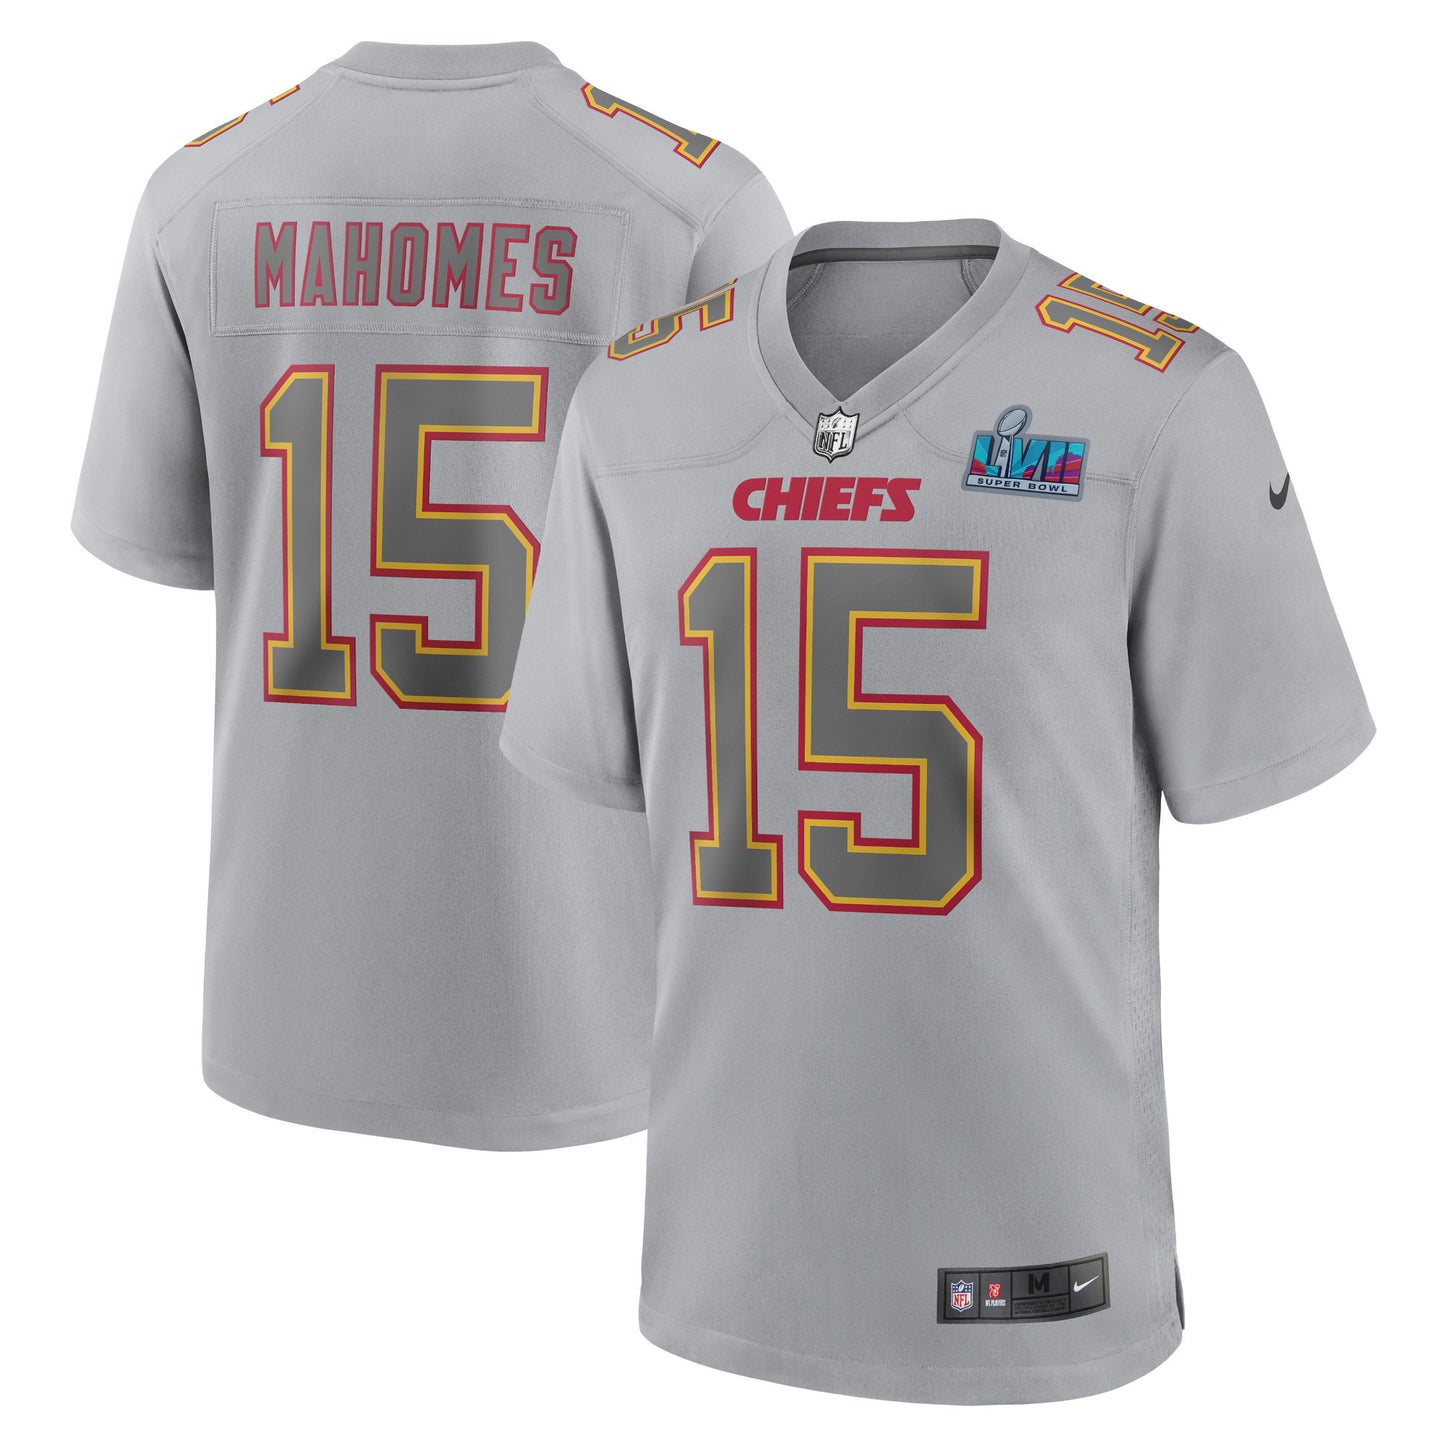 Patrick Mahomes Kansas City Chiefs Nike Youth Super Bowl LVII Patch Atmosphere Fashion Game Jersey - Gray